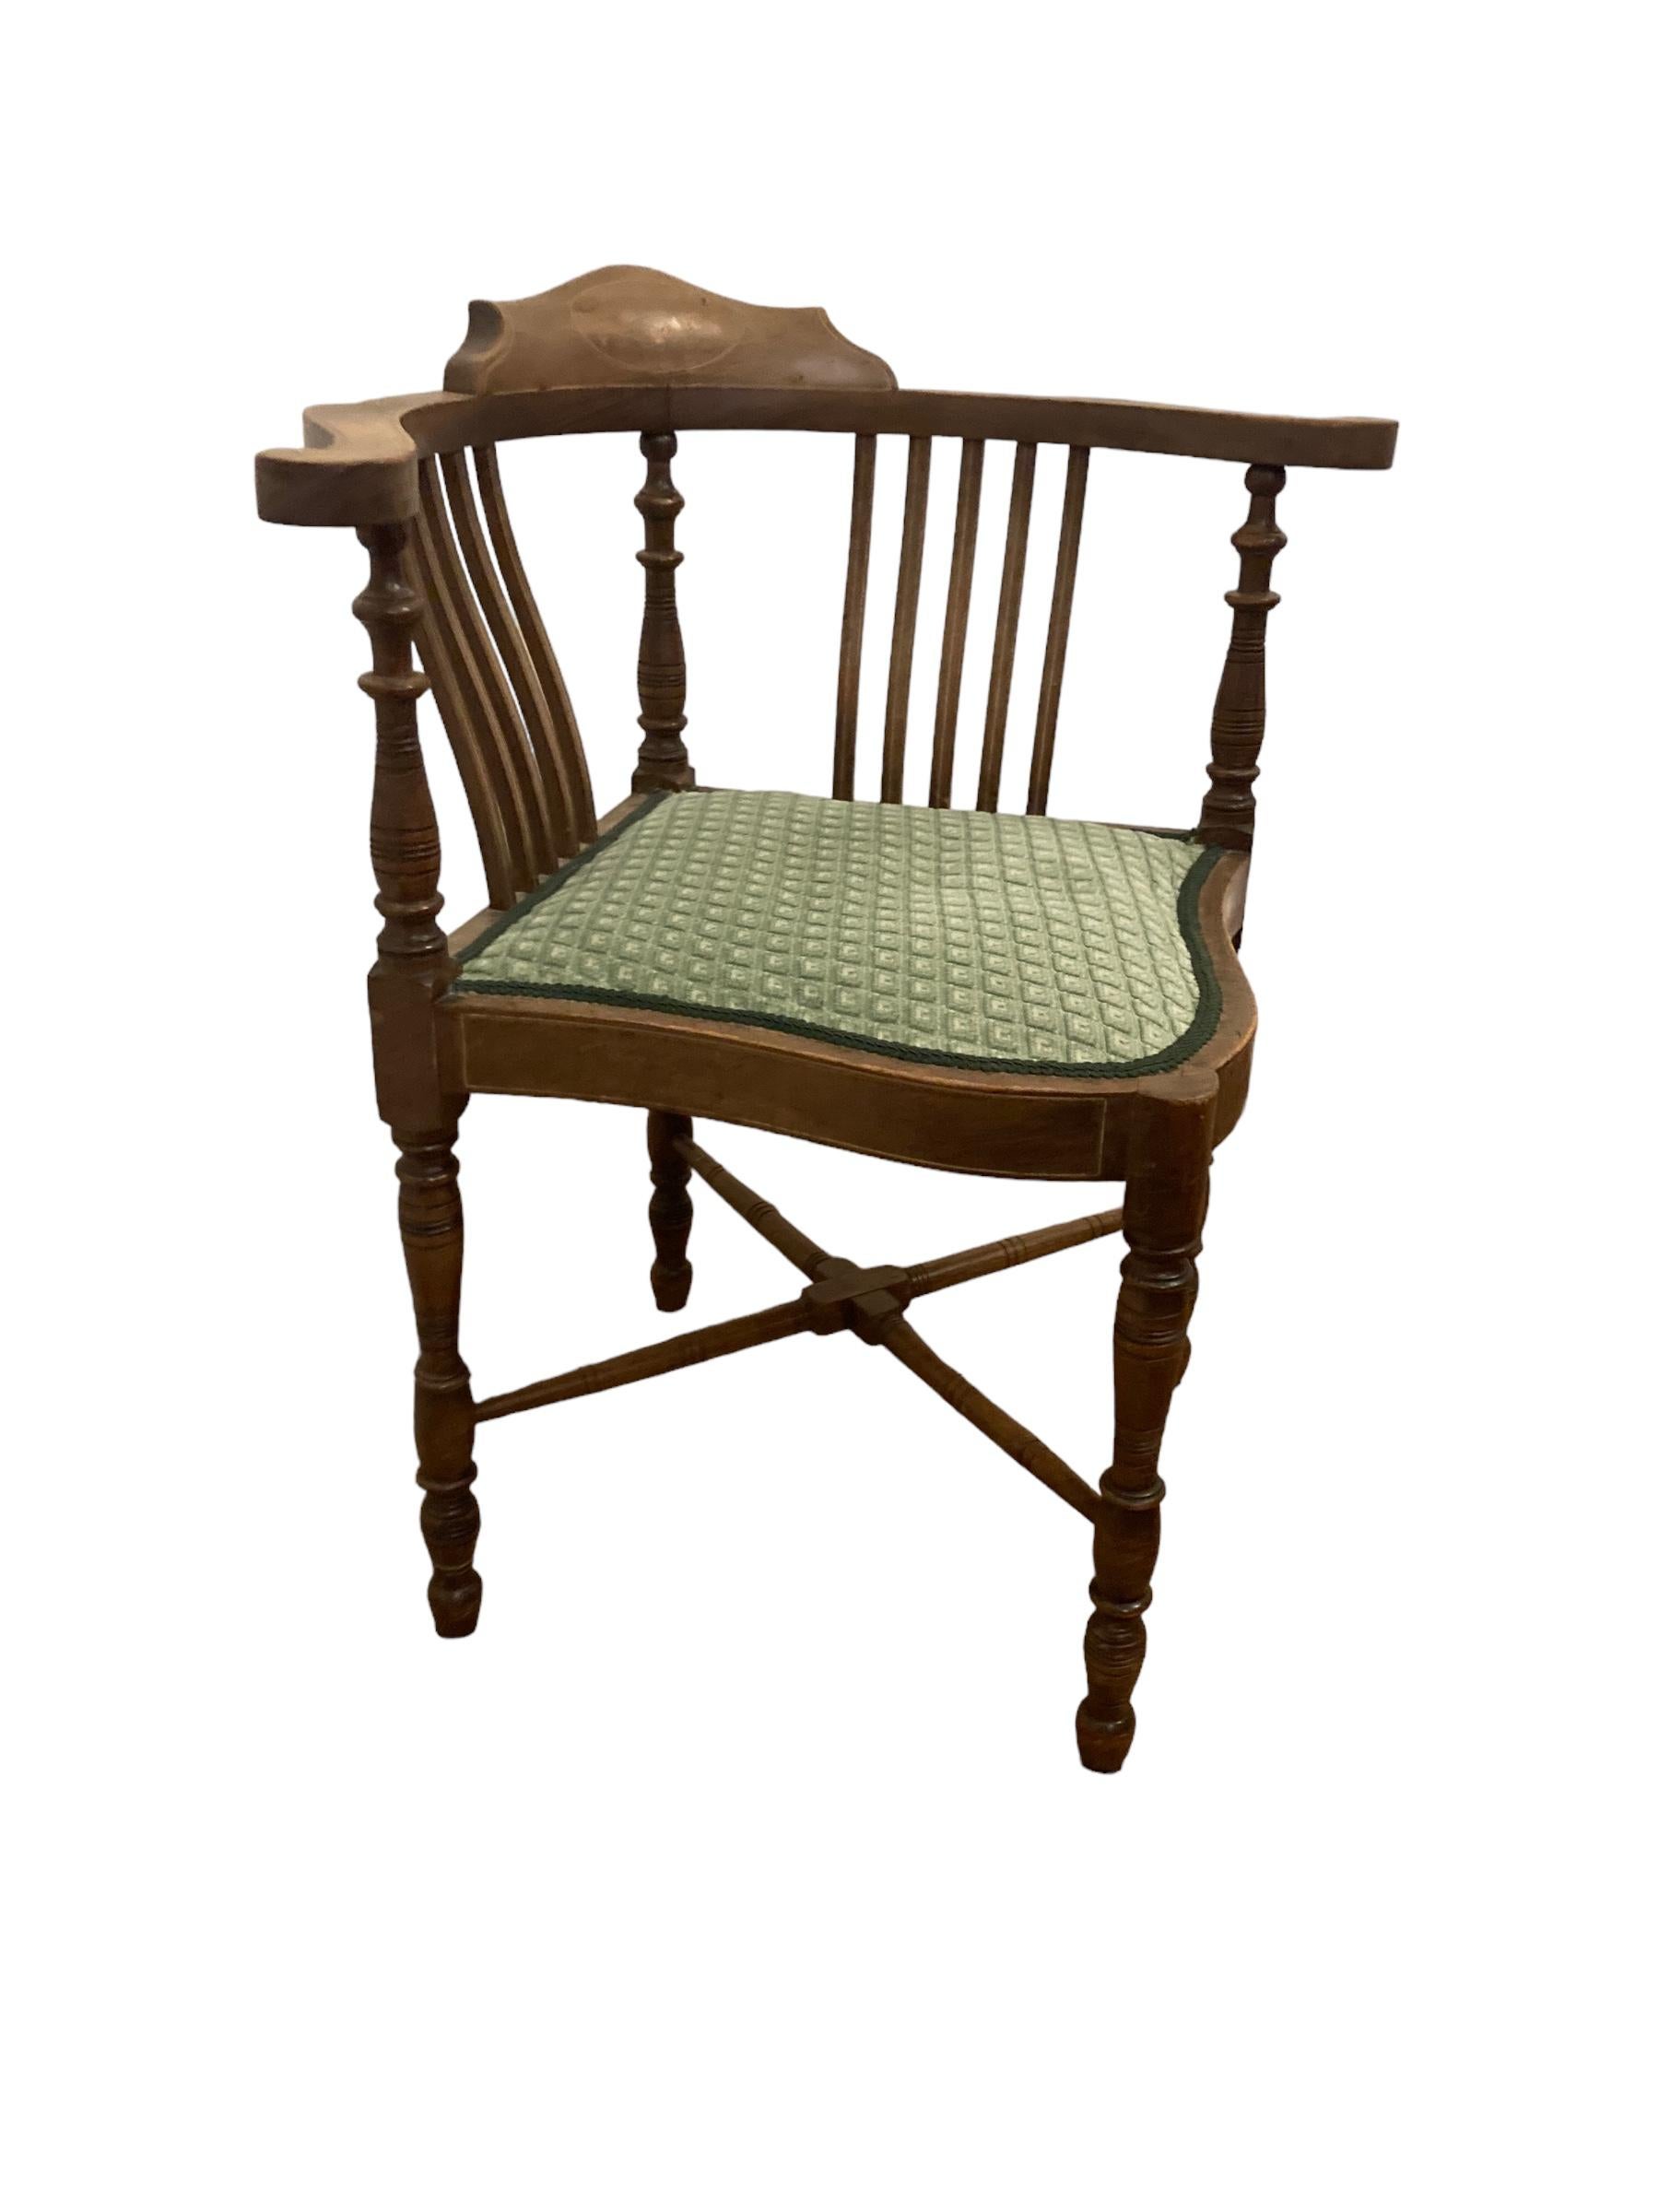 Edwardian Inlaid Mahogany Corner Chair. Shaped back with floral detail.Four turned Legs with X stretcher, Olive green seating which is typical for the time. This Chair is in original and great sturdy condition. A great example of Edwardian